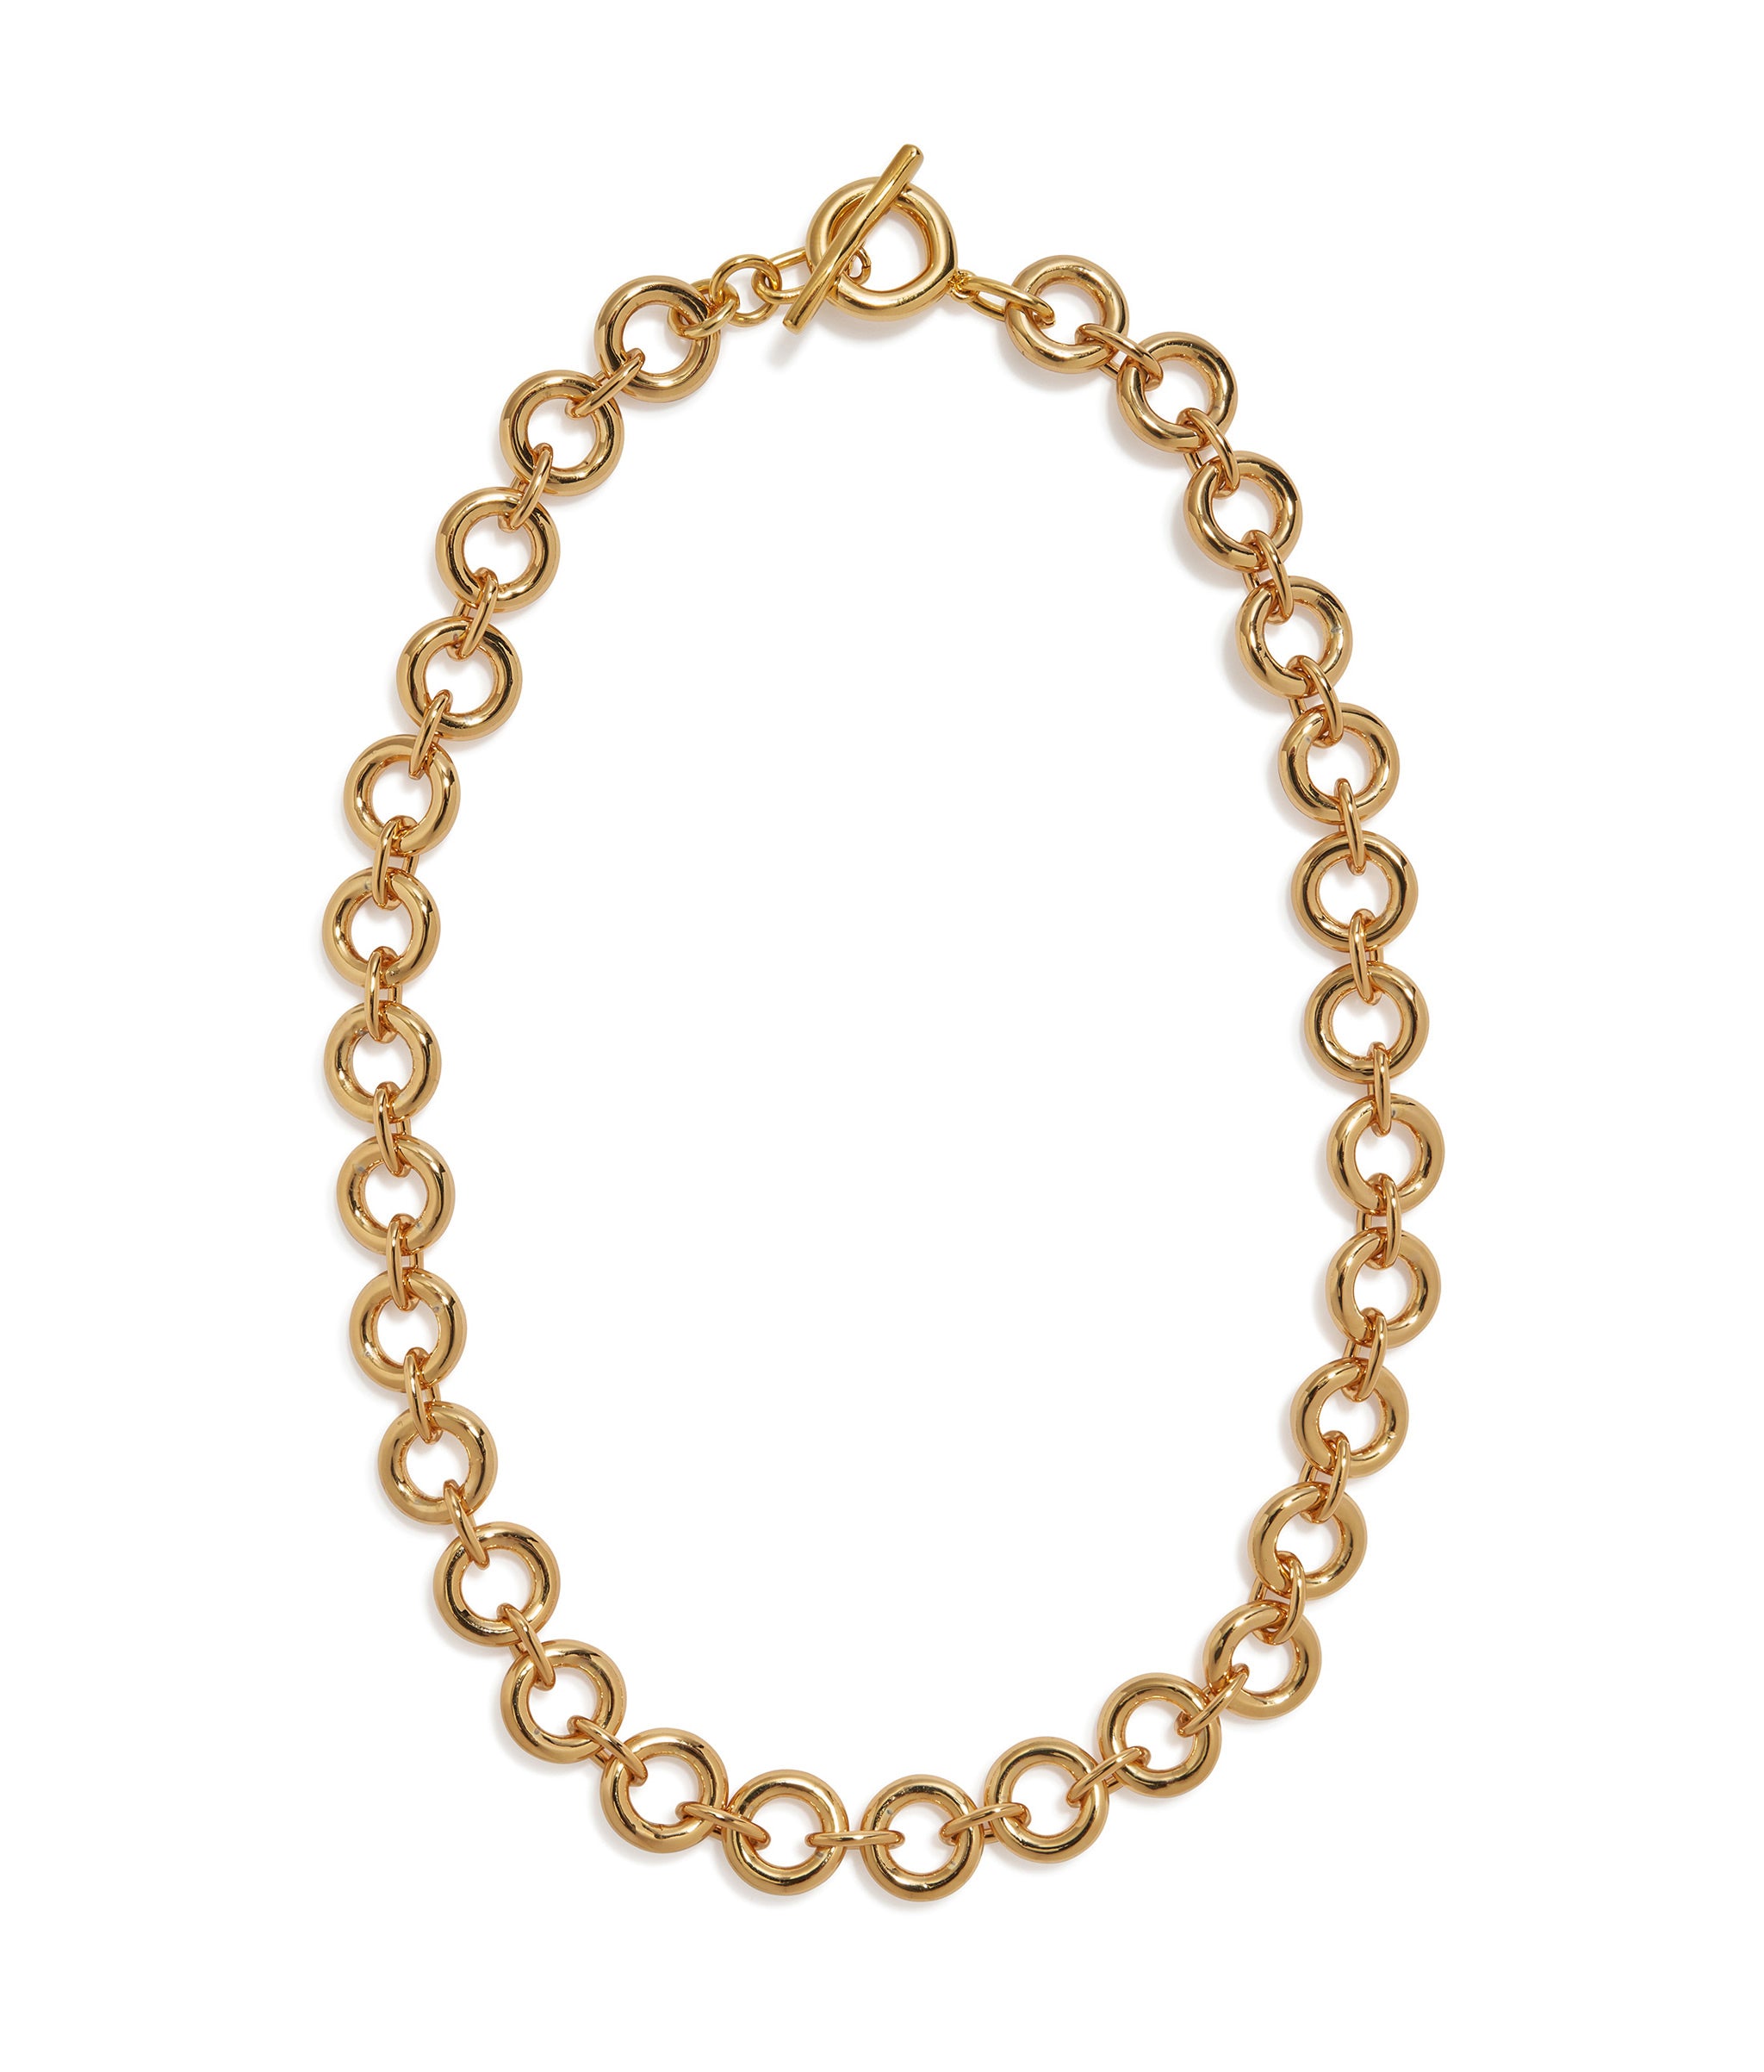 Mood Necklace in Gold. Gold-plated brass circle chain link strand with gold-plated toggle closure.